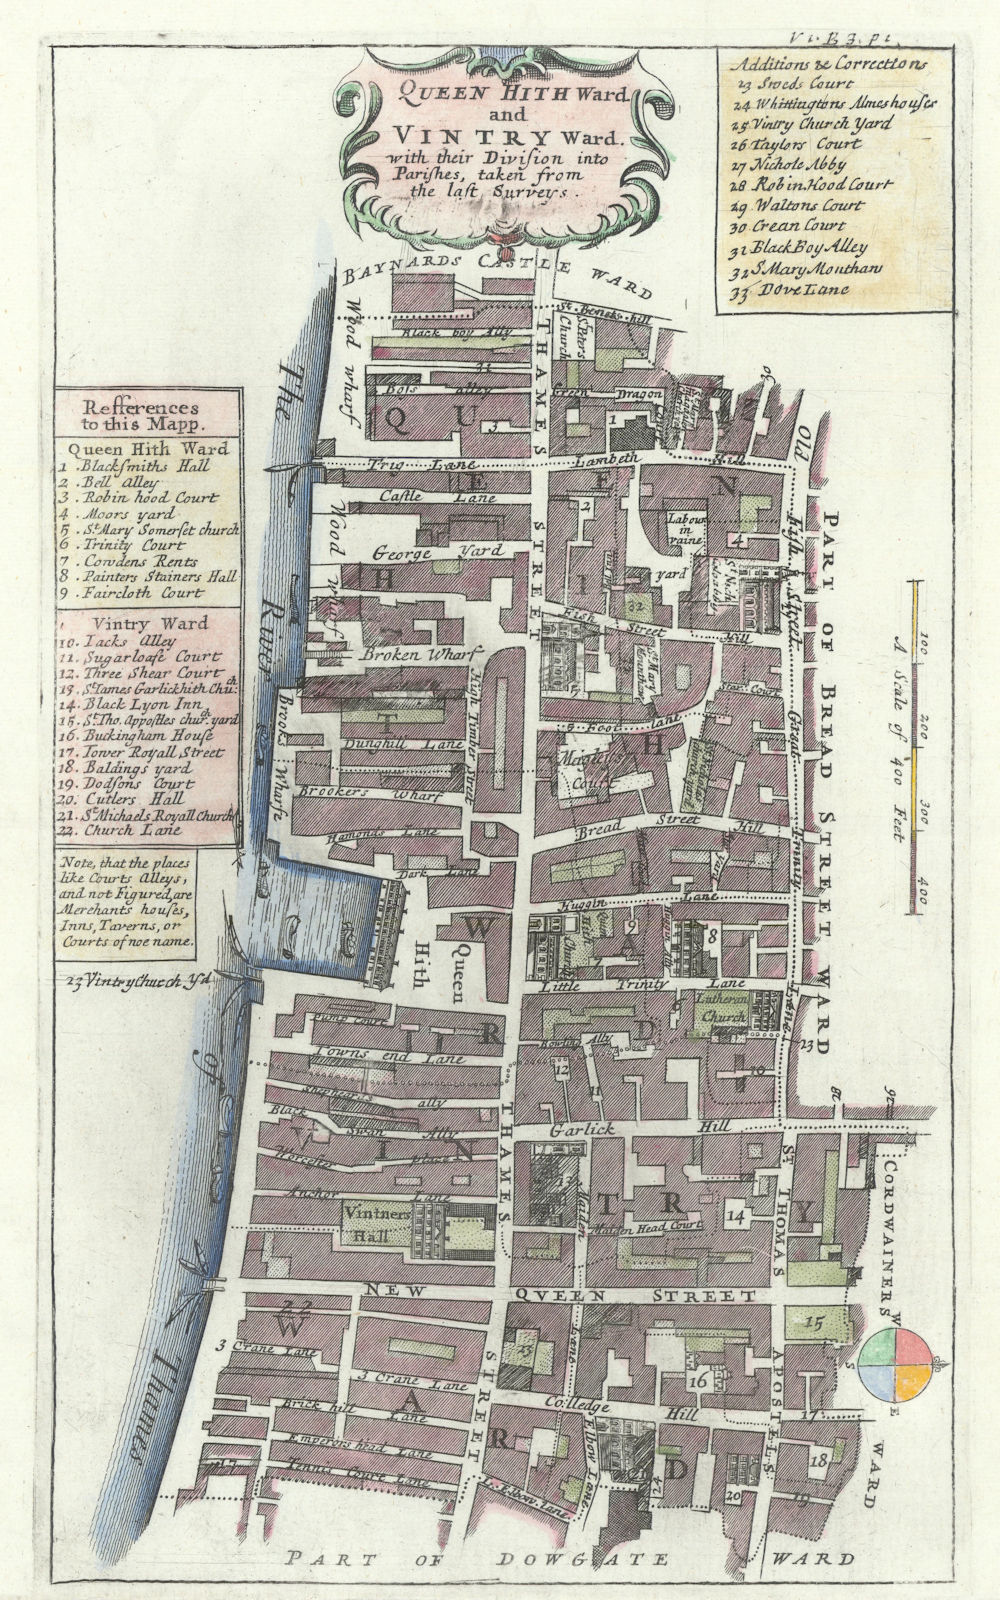 Associate Product Queenhithe & Vintry Wards. Thames Street, City of London. STOW/STRYPE 1720 map